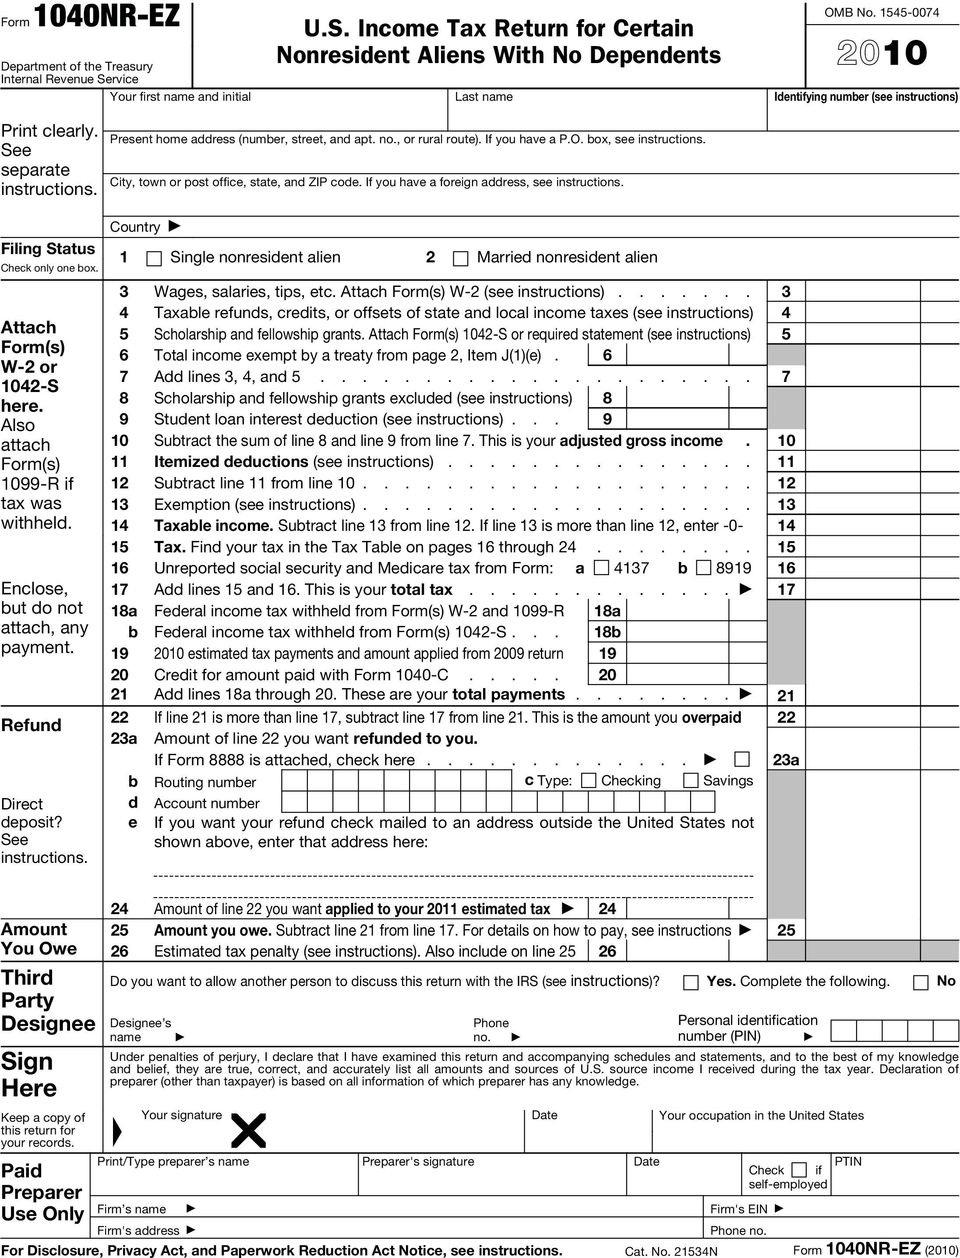 Attach Form(s) W-2 or 1042-S here. Also attach Form(s) 1099-R if tax was withheld. Enclose, but do not attach, any payment. Refund Direct deposit? See instructions.